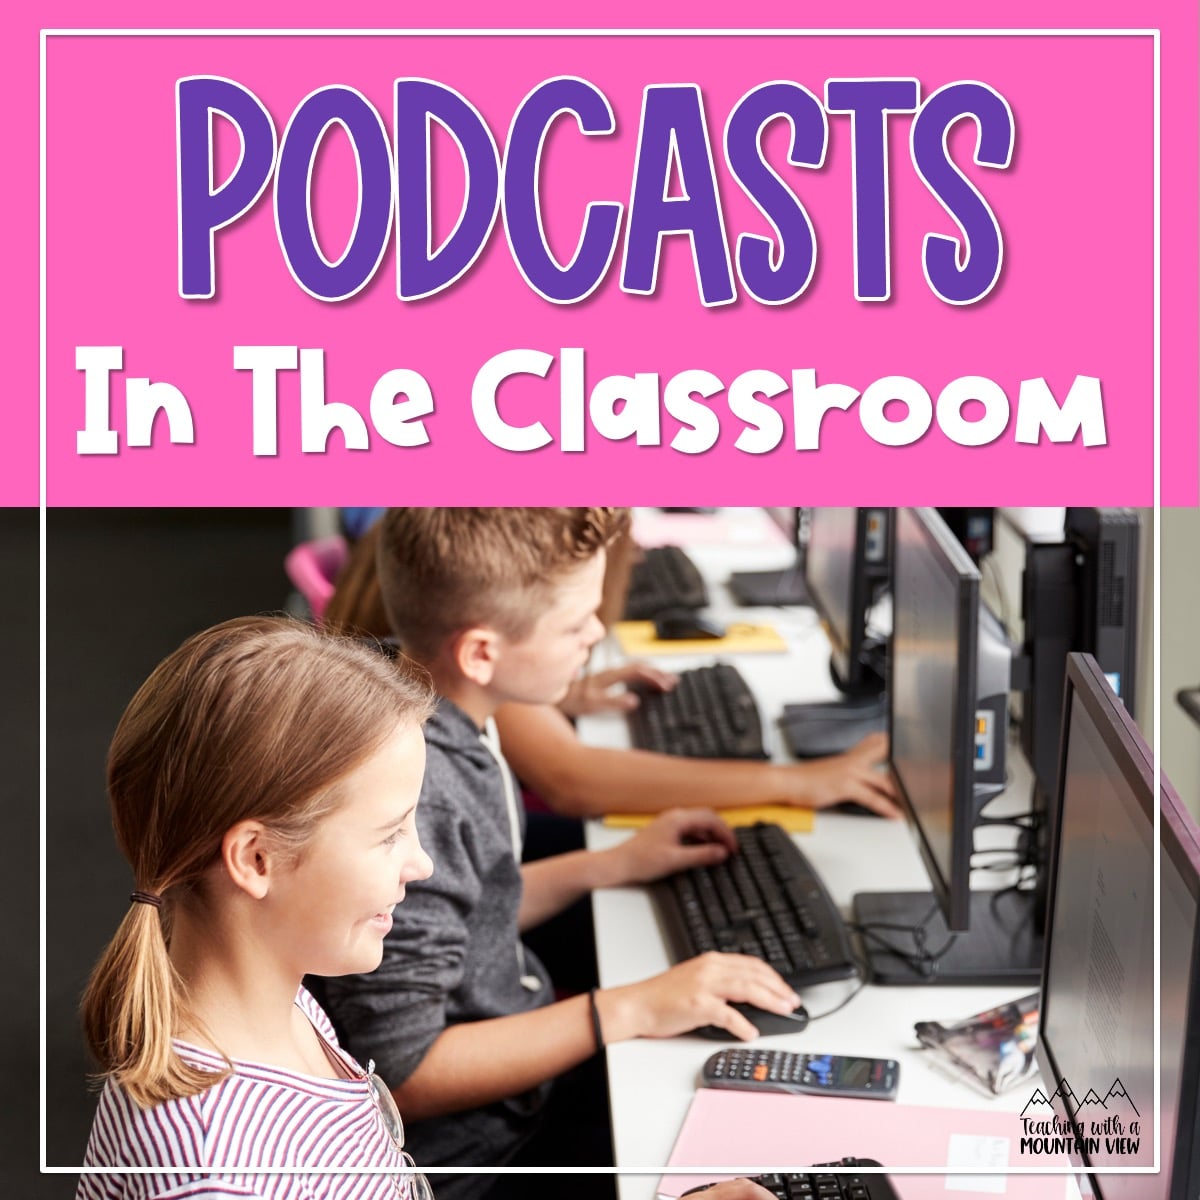 Learn how to use podcasts in the classroom to challenge students' listening skills, and integrate content related skills too.